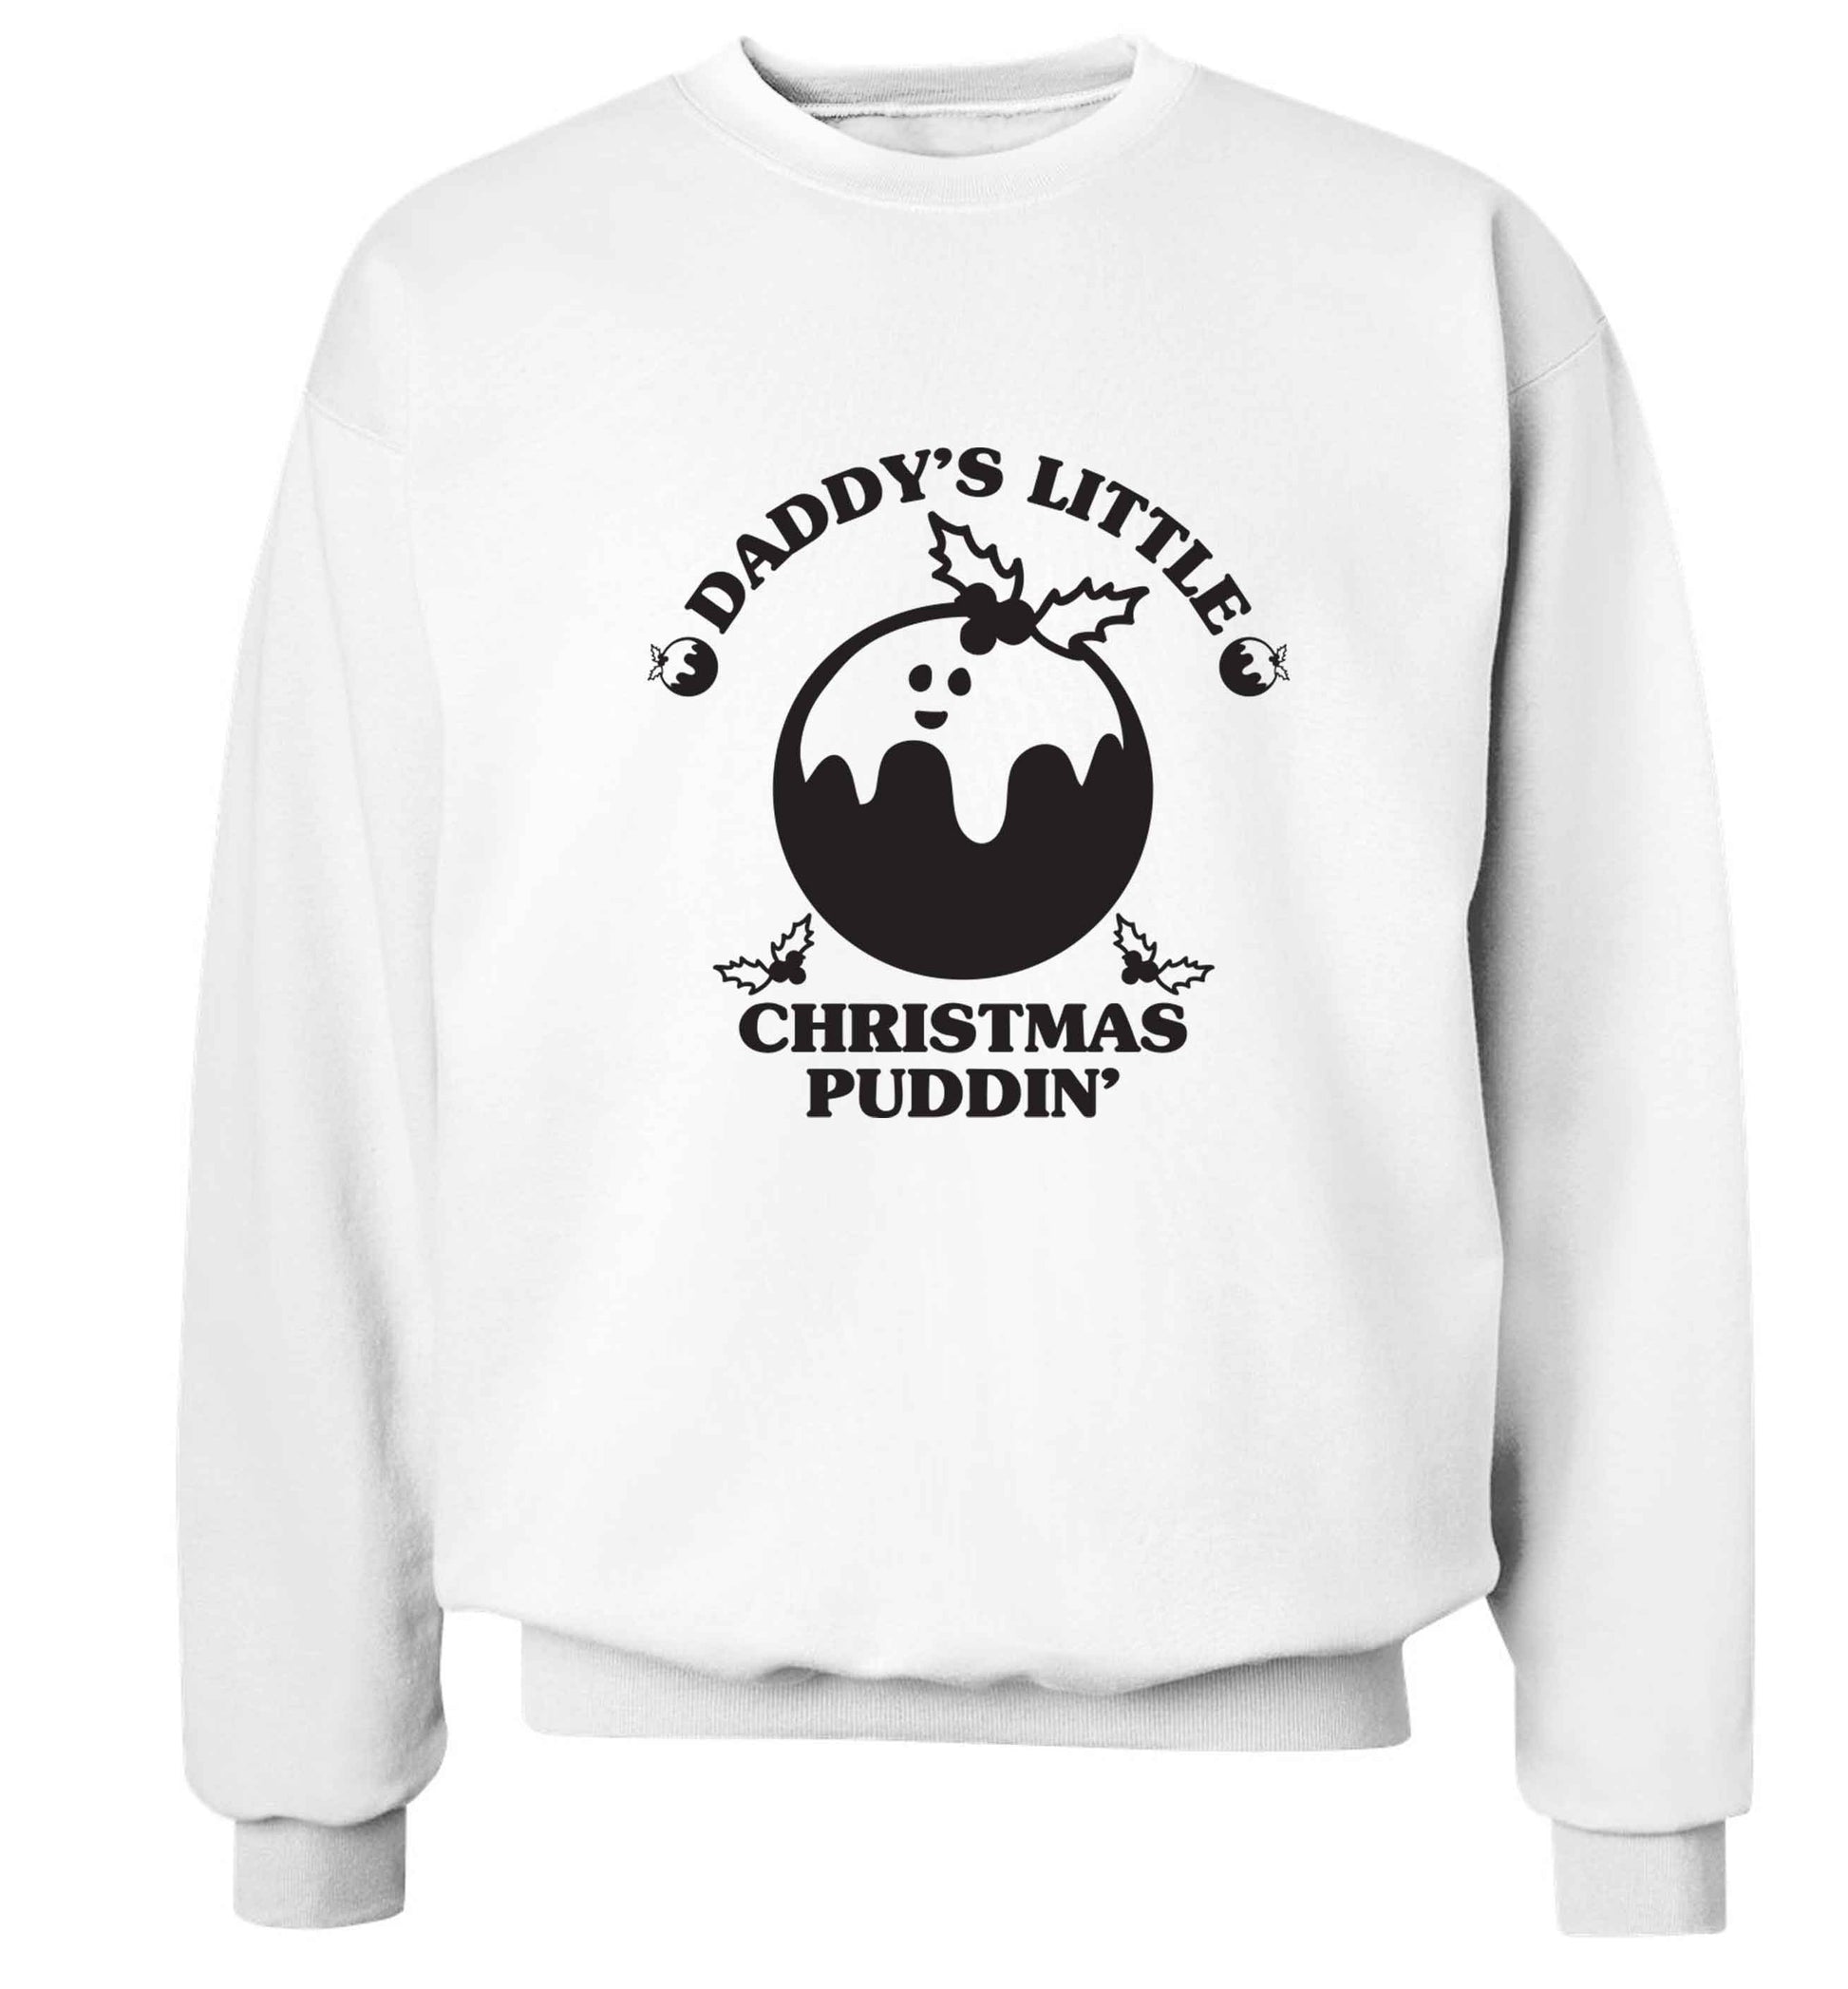 Daddy's little Christmas puddin' Adult's unisex white Sweater 2XL